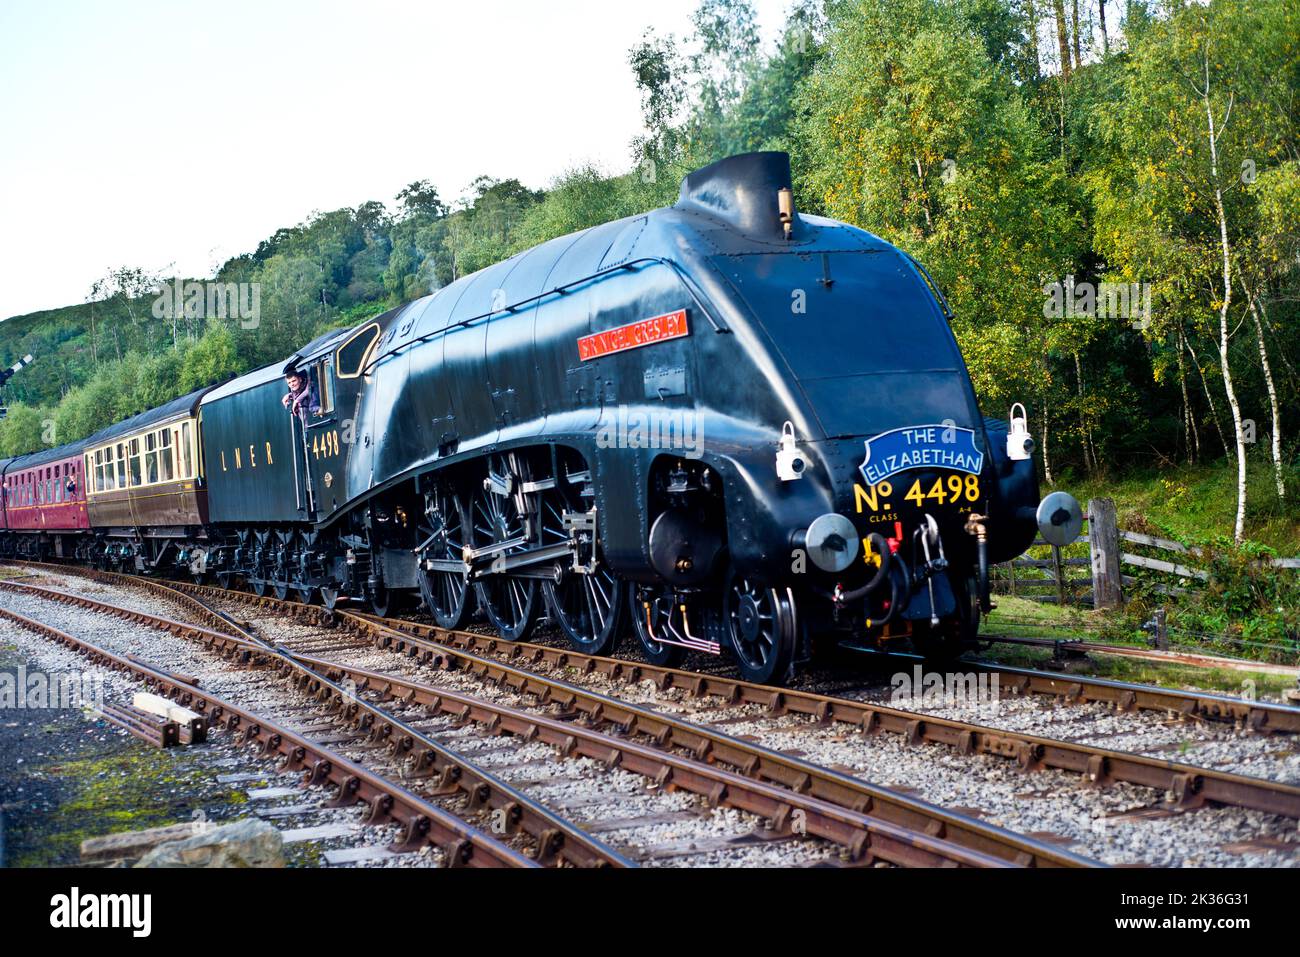 A4 Pacific no 4498 Sir Nigel Gresley in wartime black livery at Levisham, North Yorkshire Moors Railway, England Stock Photo